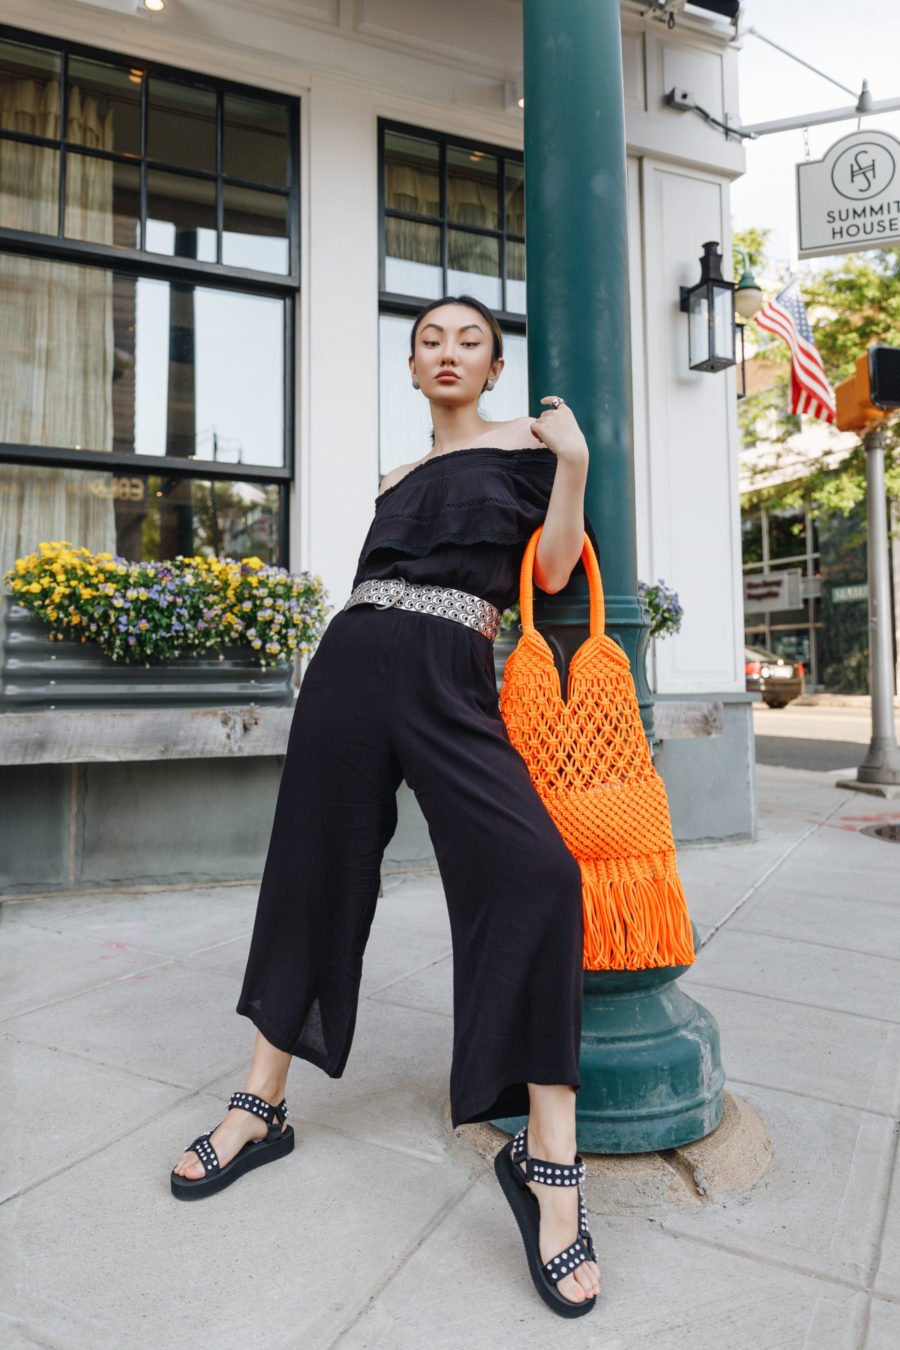 summer weekly outfits featuring walmart jumpsuit steve madden sandals and orange macrame bag // Jessica Wang - Notjessfashion.com